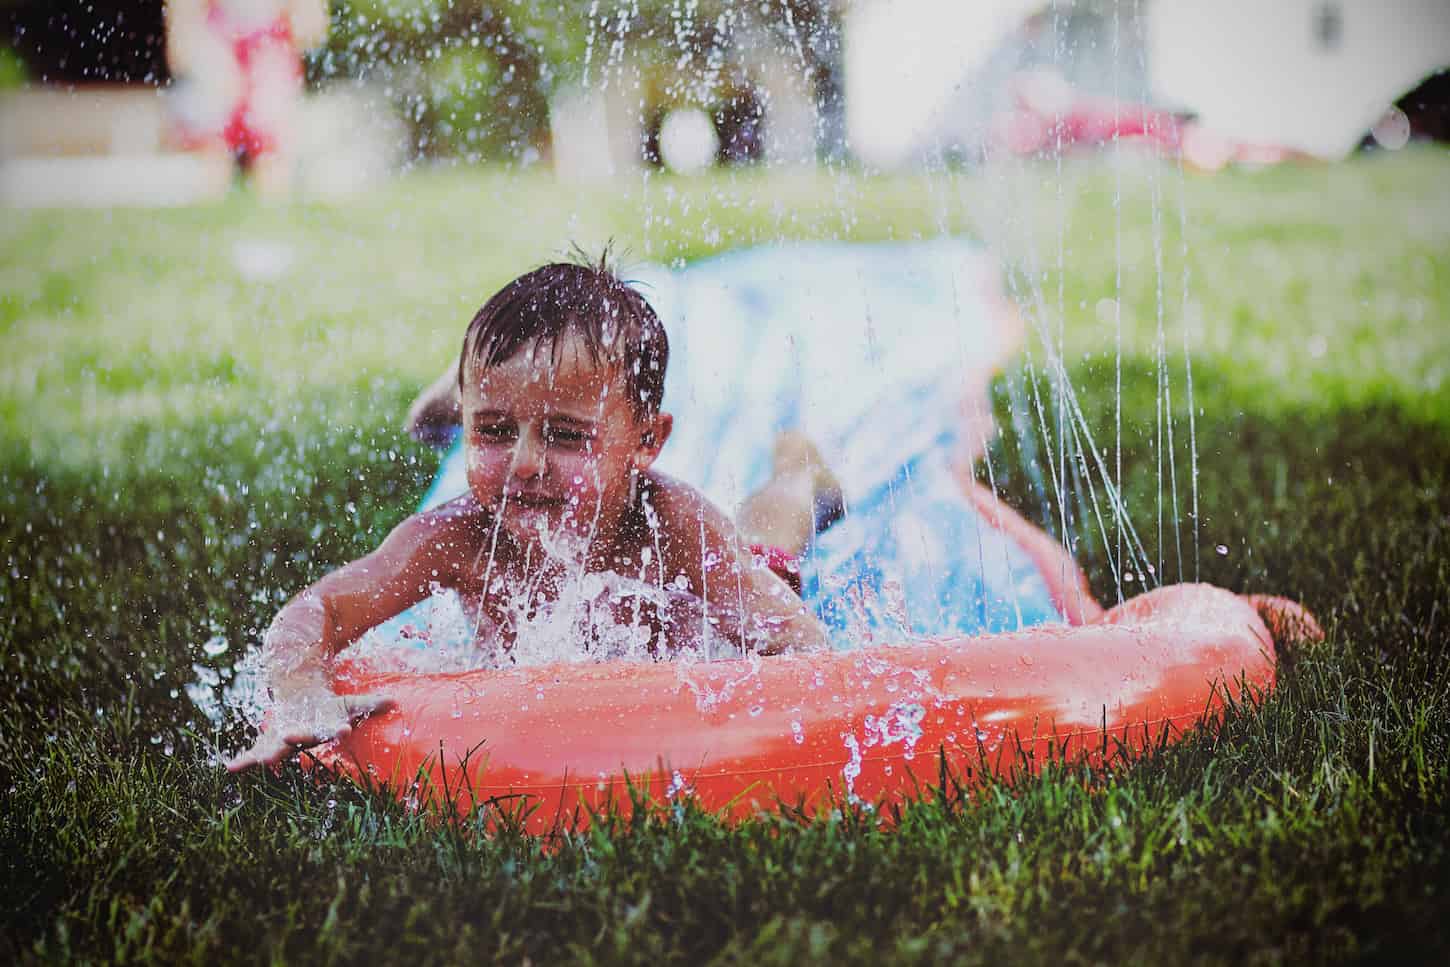 An image of a young boy sliding down and splashing on an outdoor slip-and-slide. Make a great expression and have fun on a warm summer day.